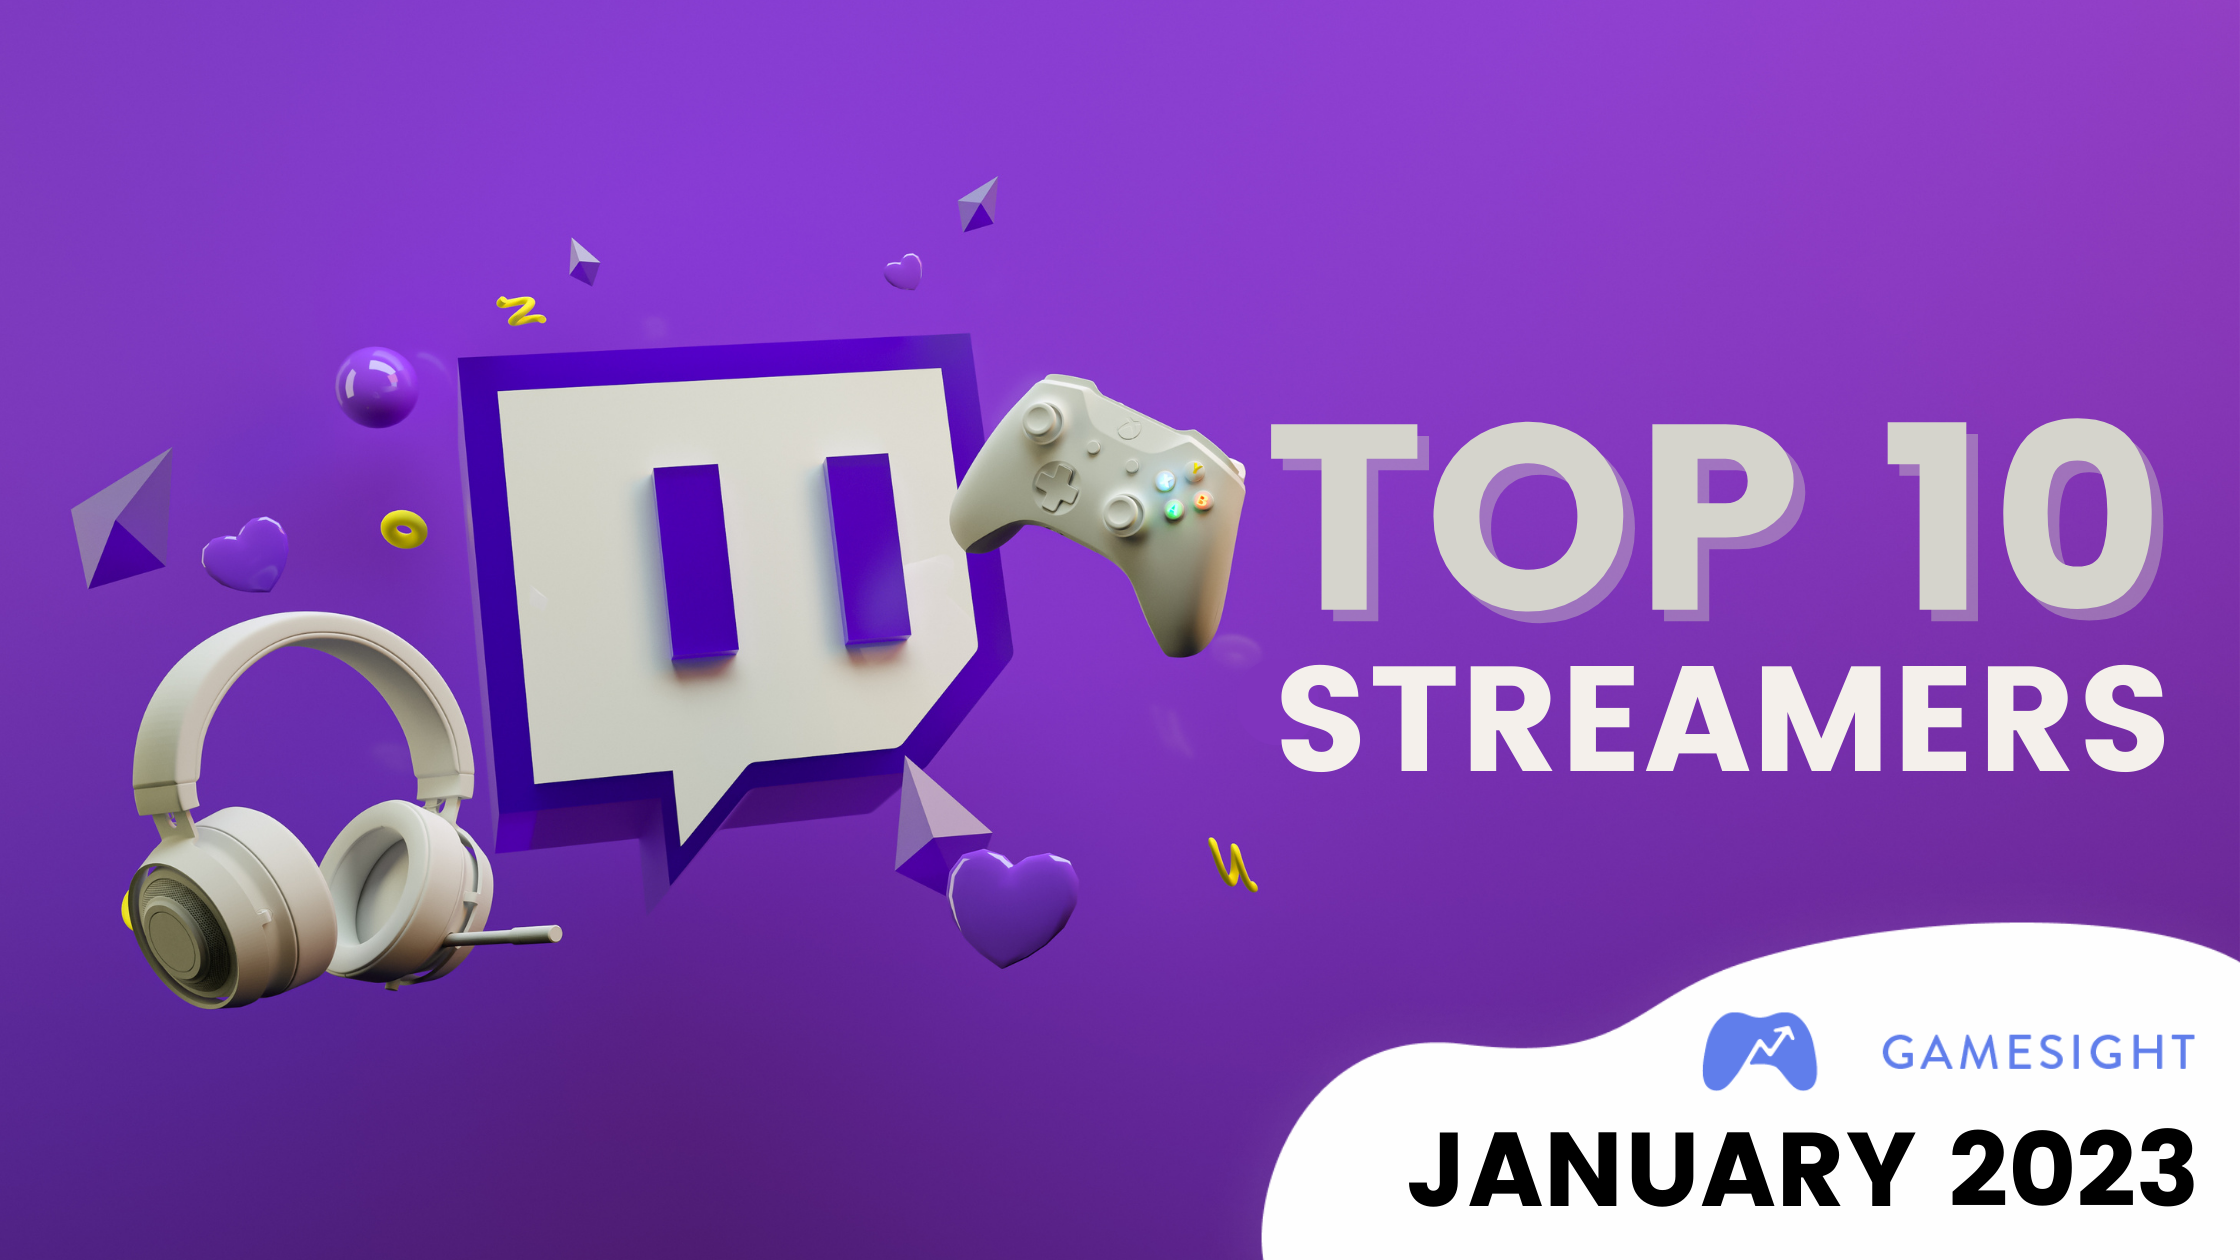 Most Popular Spanish Twitch Streamers in 2021